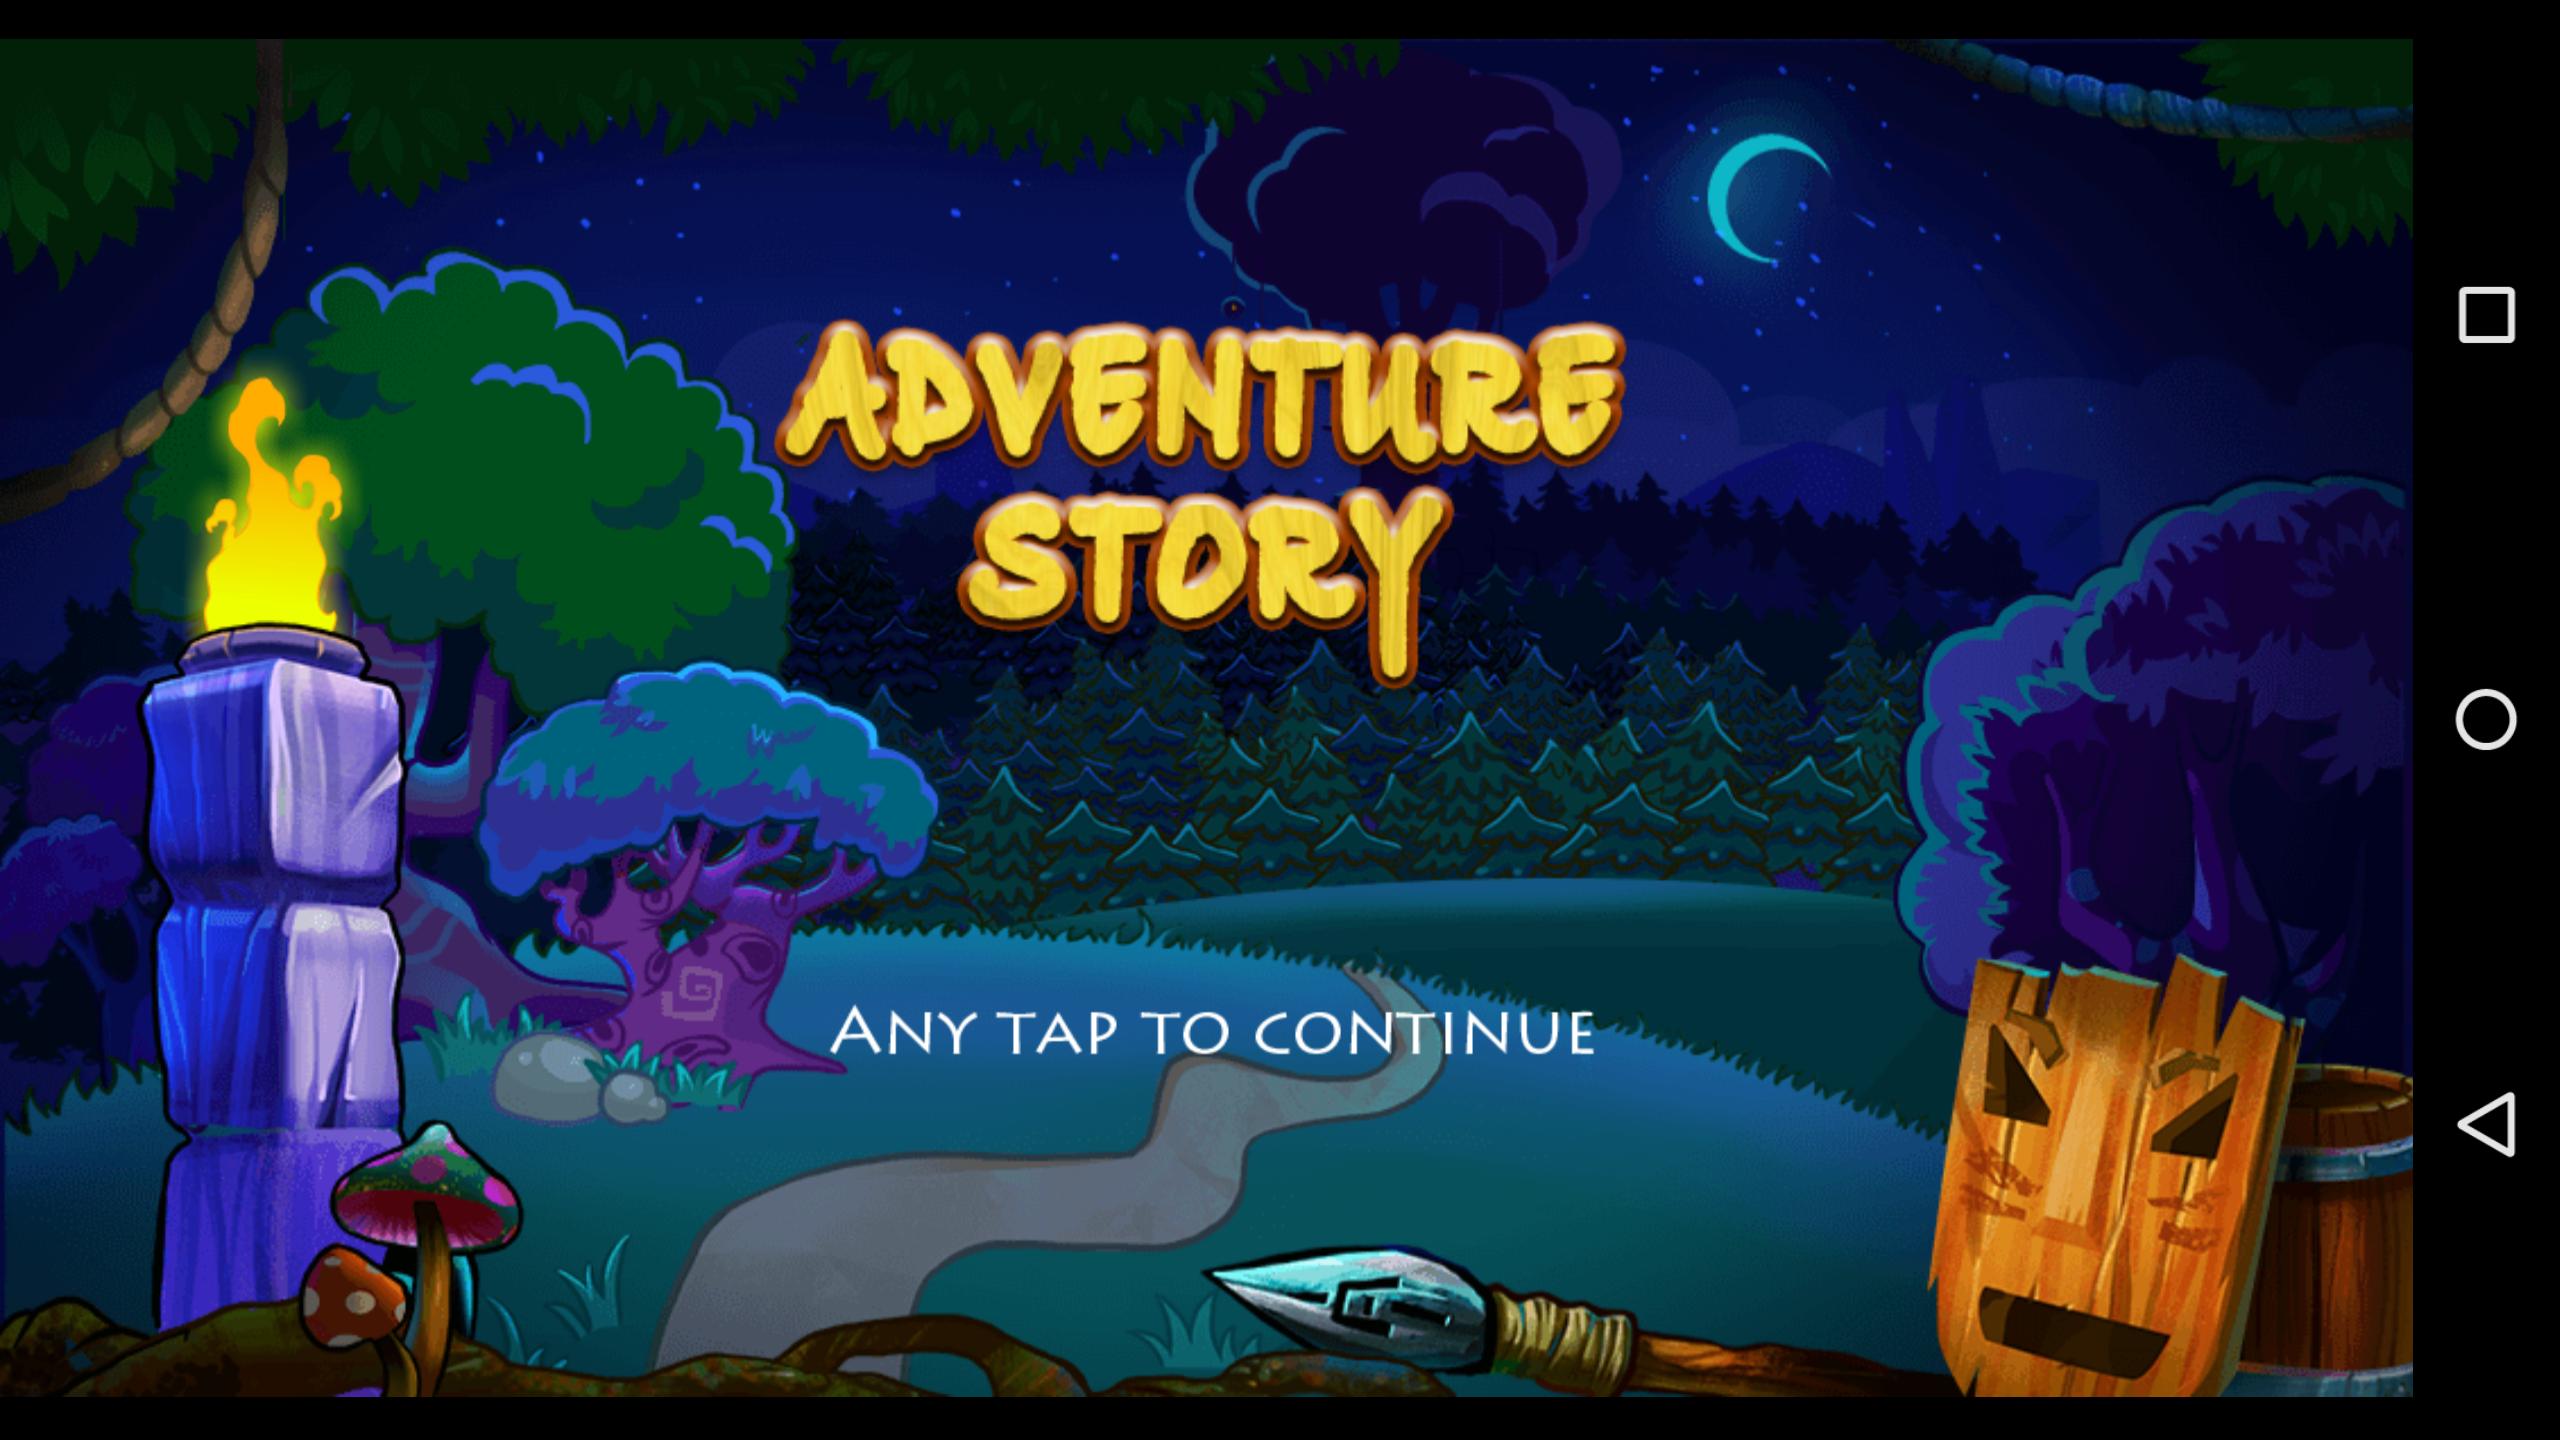 Your story adventure